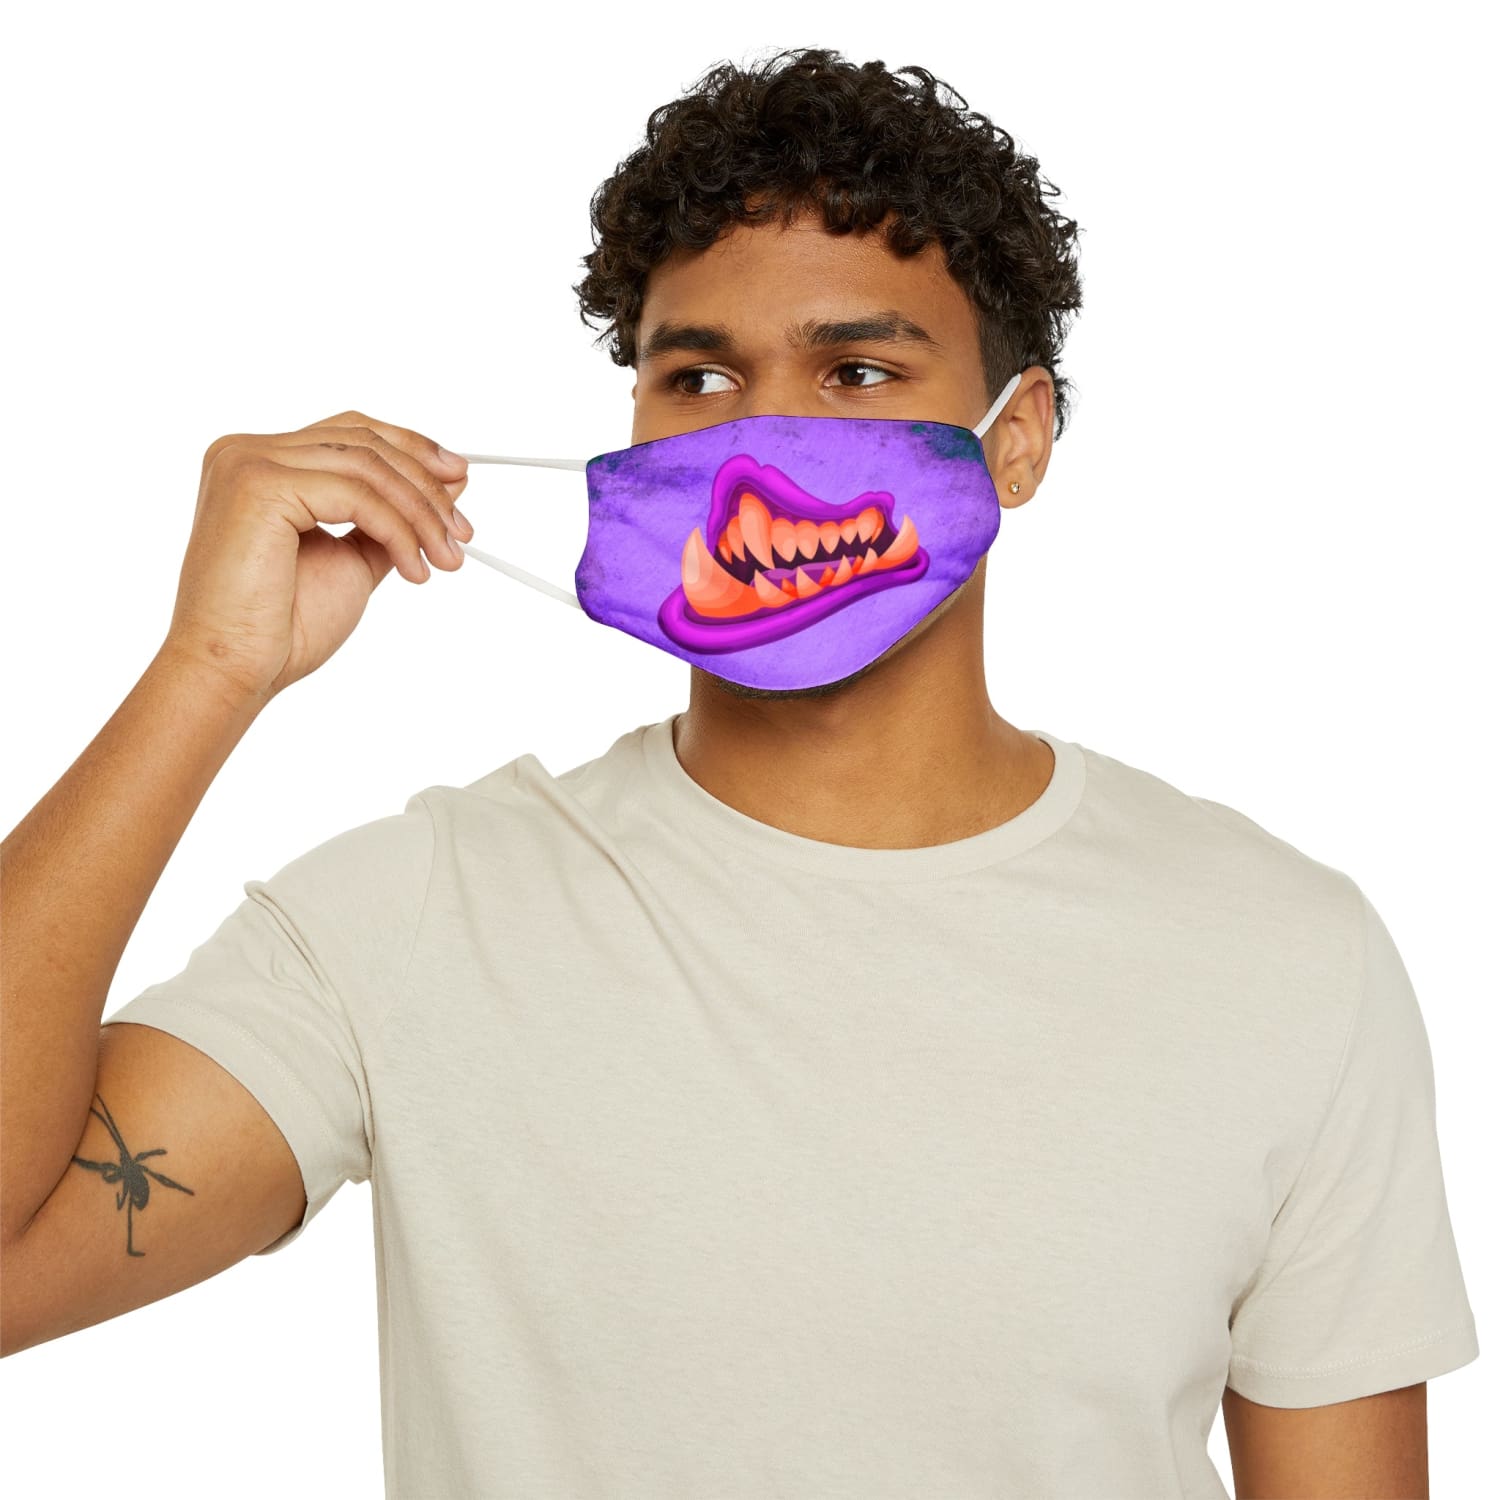 Pink Monster Mouth Snug-Fit Fabric Face Mask - 7.3’’ × 4.5’’ - Accessories